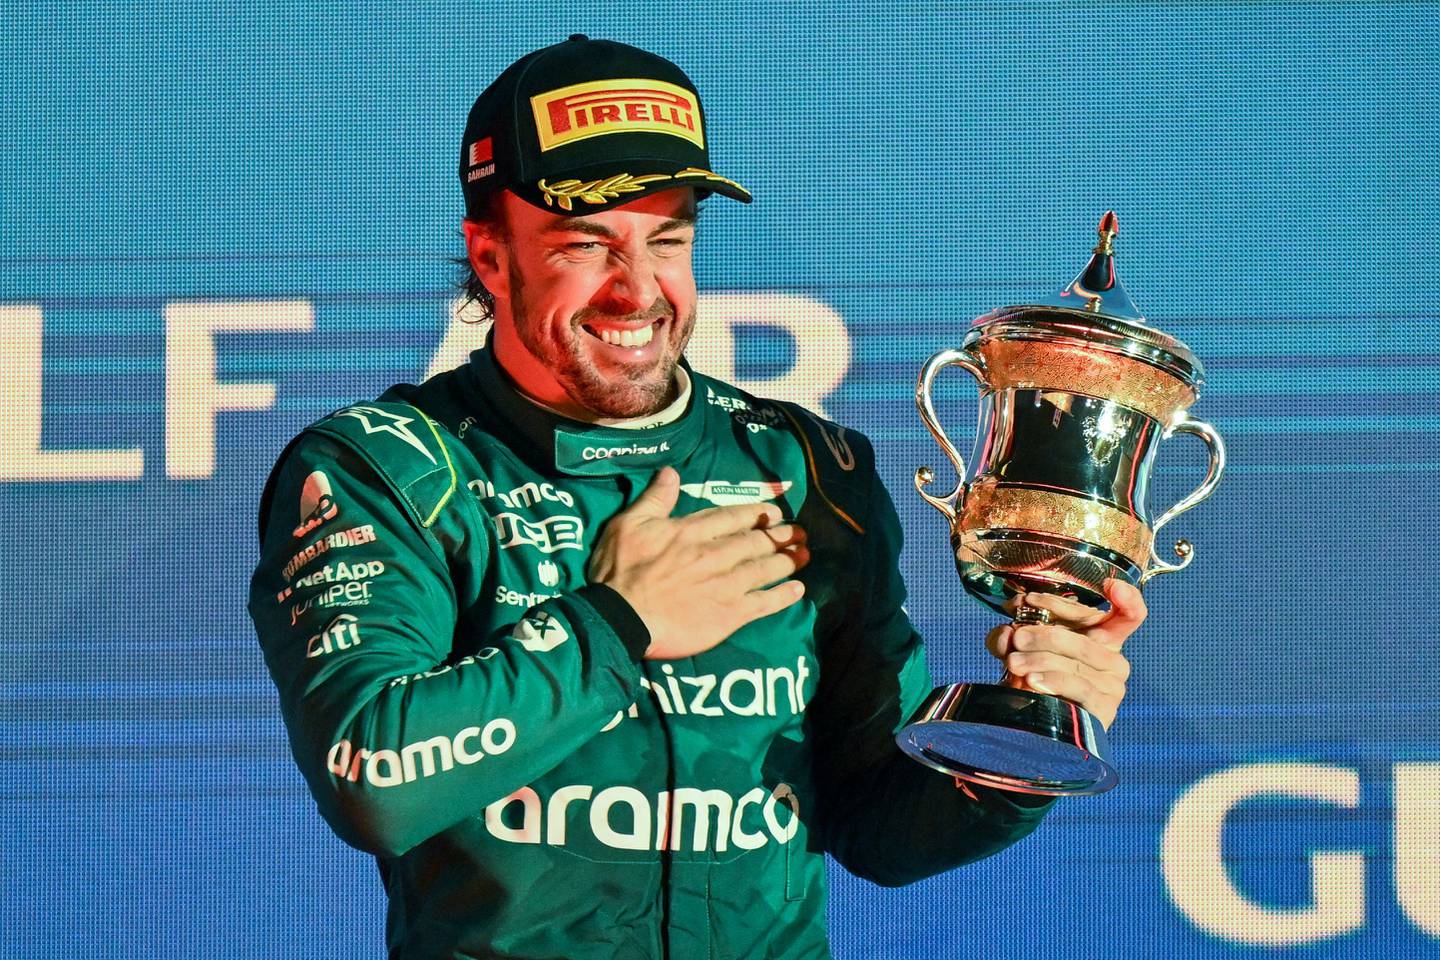 Aston Martin's Fernando Alonso celebrates on the podium with a third place after the Bahrain Formula One Grand Prix on March 5.dfd